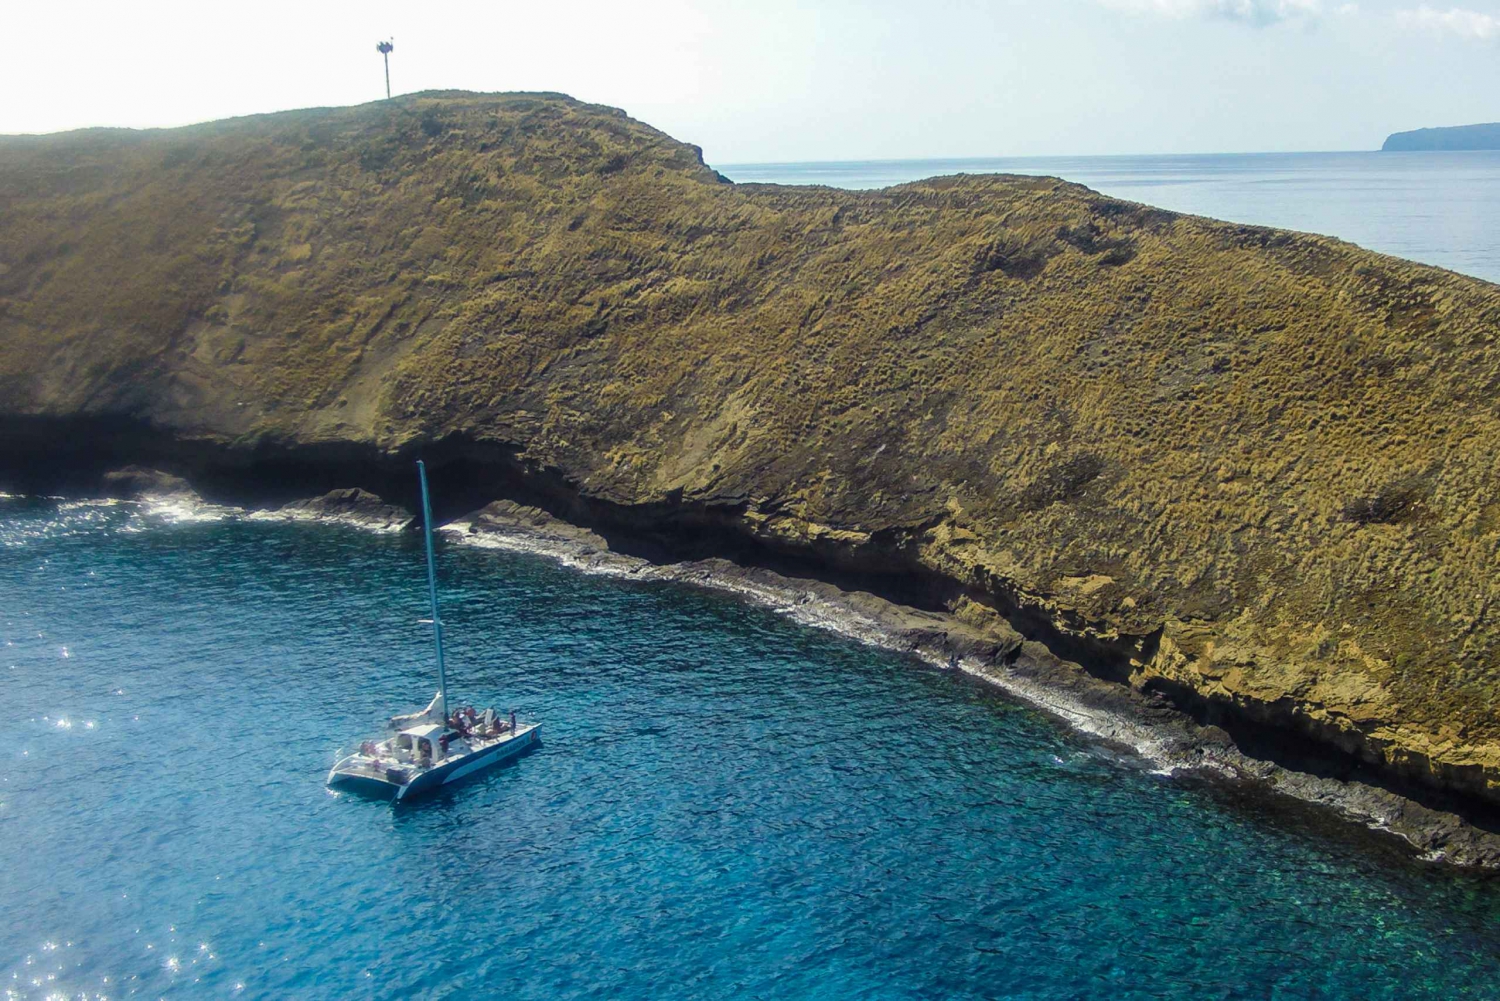 Maui: Molokini Snorkel & Performance Sail with Lunch